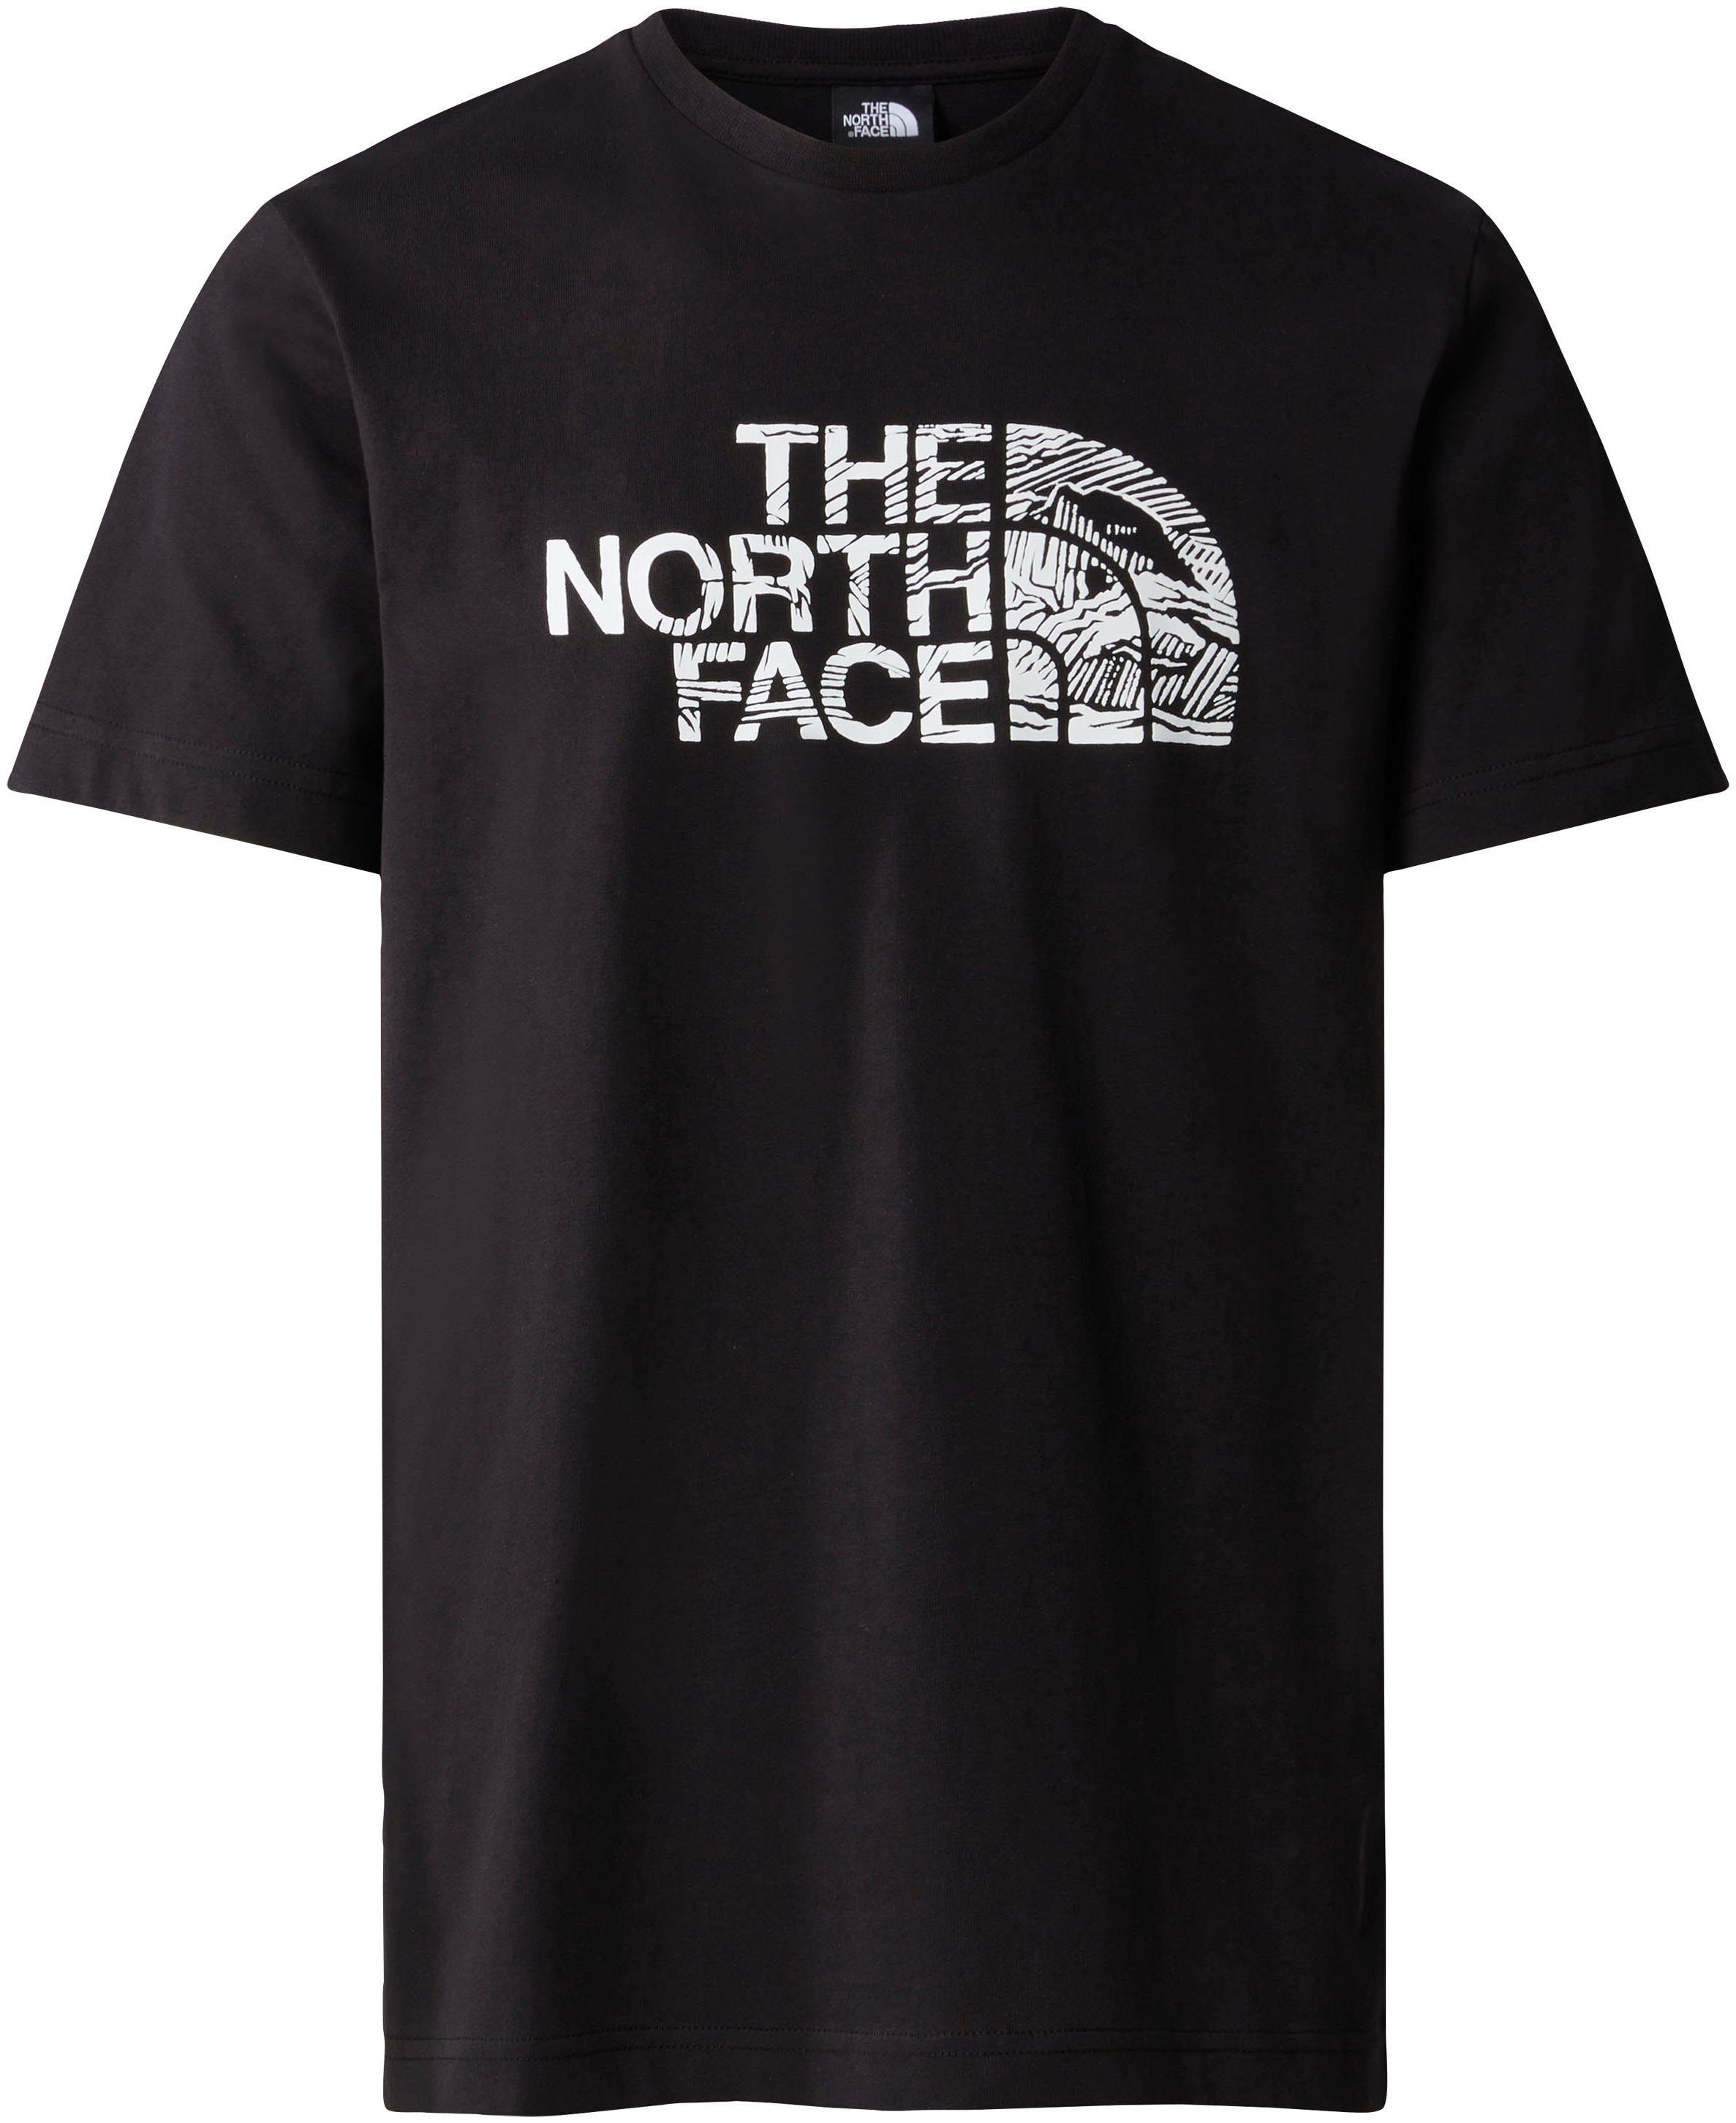 The M TEE S/S T-Shirt DOME North WOODCUT Face